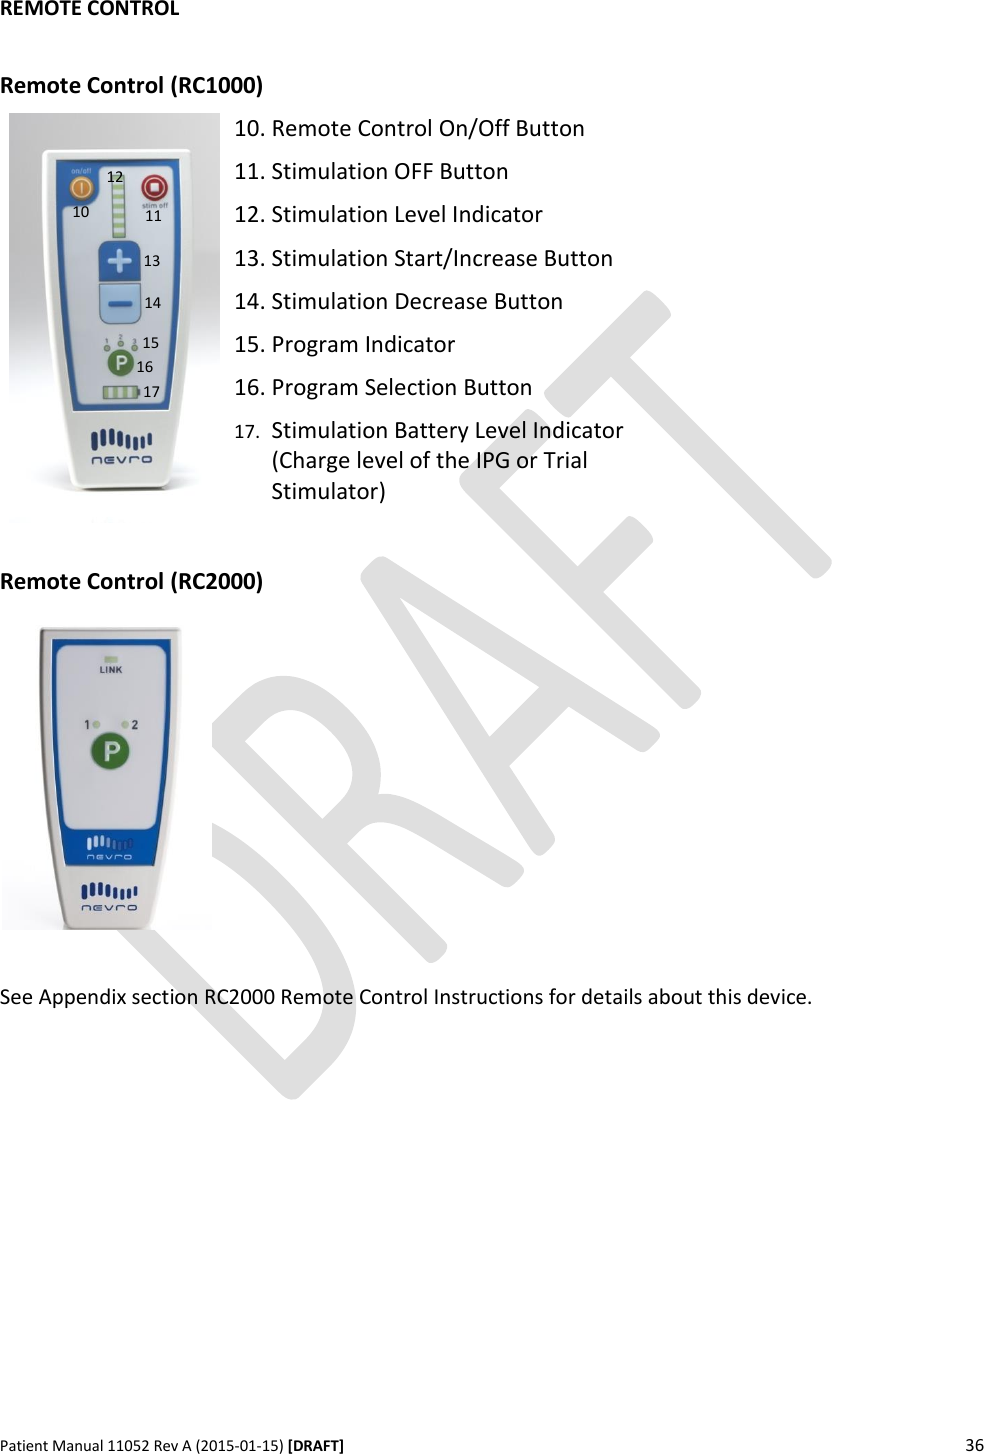      Patient Manual 11052 Rev A (2015-01-15) [DRAFT] 36    REMOTE CONTROL  Remote Control (RC1000)  10. Remote Control On/Off Button 11. Stimulation OFF Button 12. Stimulation Level Indicator 13. Stimulation Start/Increase Button 14. Stimulation Decrease Button 15. Program Indicator 16. Program Selection Button 17. Stimulation Battery Level Indicator (Charge level of the IPG or Trial Stimulator)    Remote Control (RC2000)    See Appendix section RC2000 Remote Control Instructions for details about this device.                10 13 12 11 16 17 14 15 